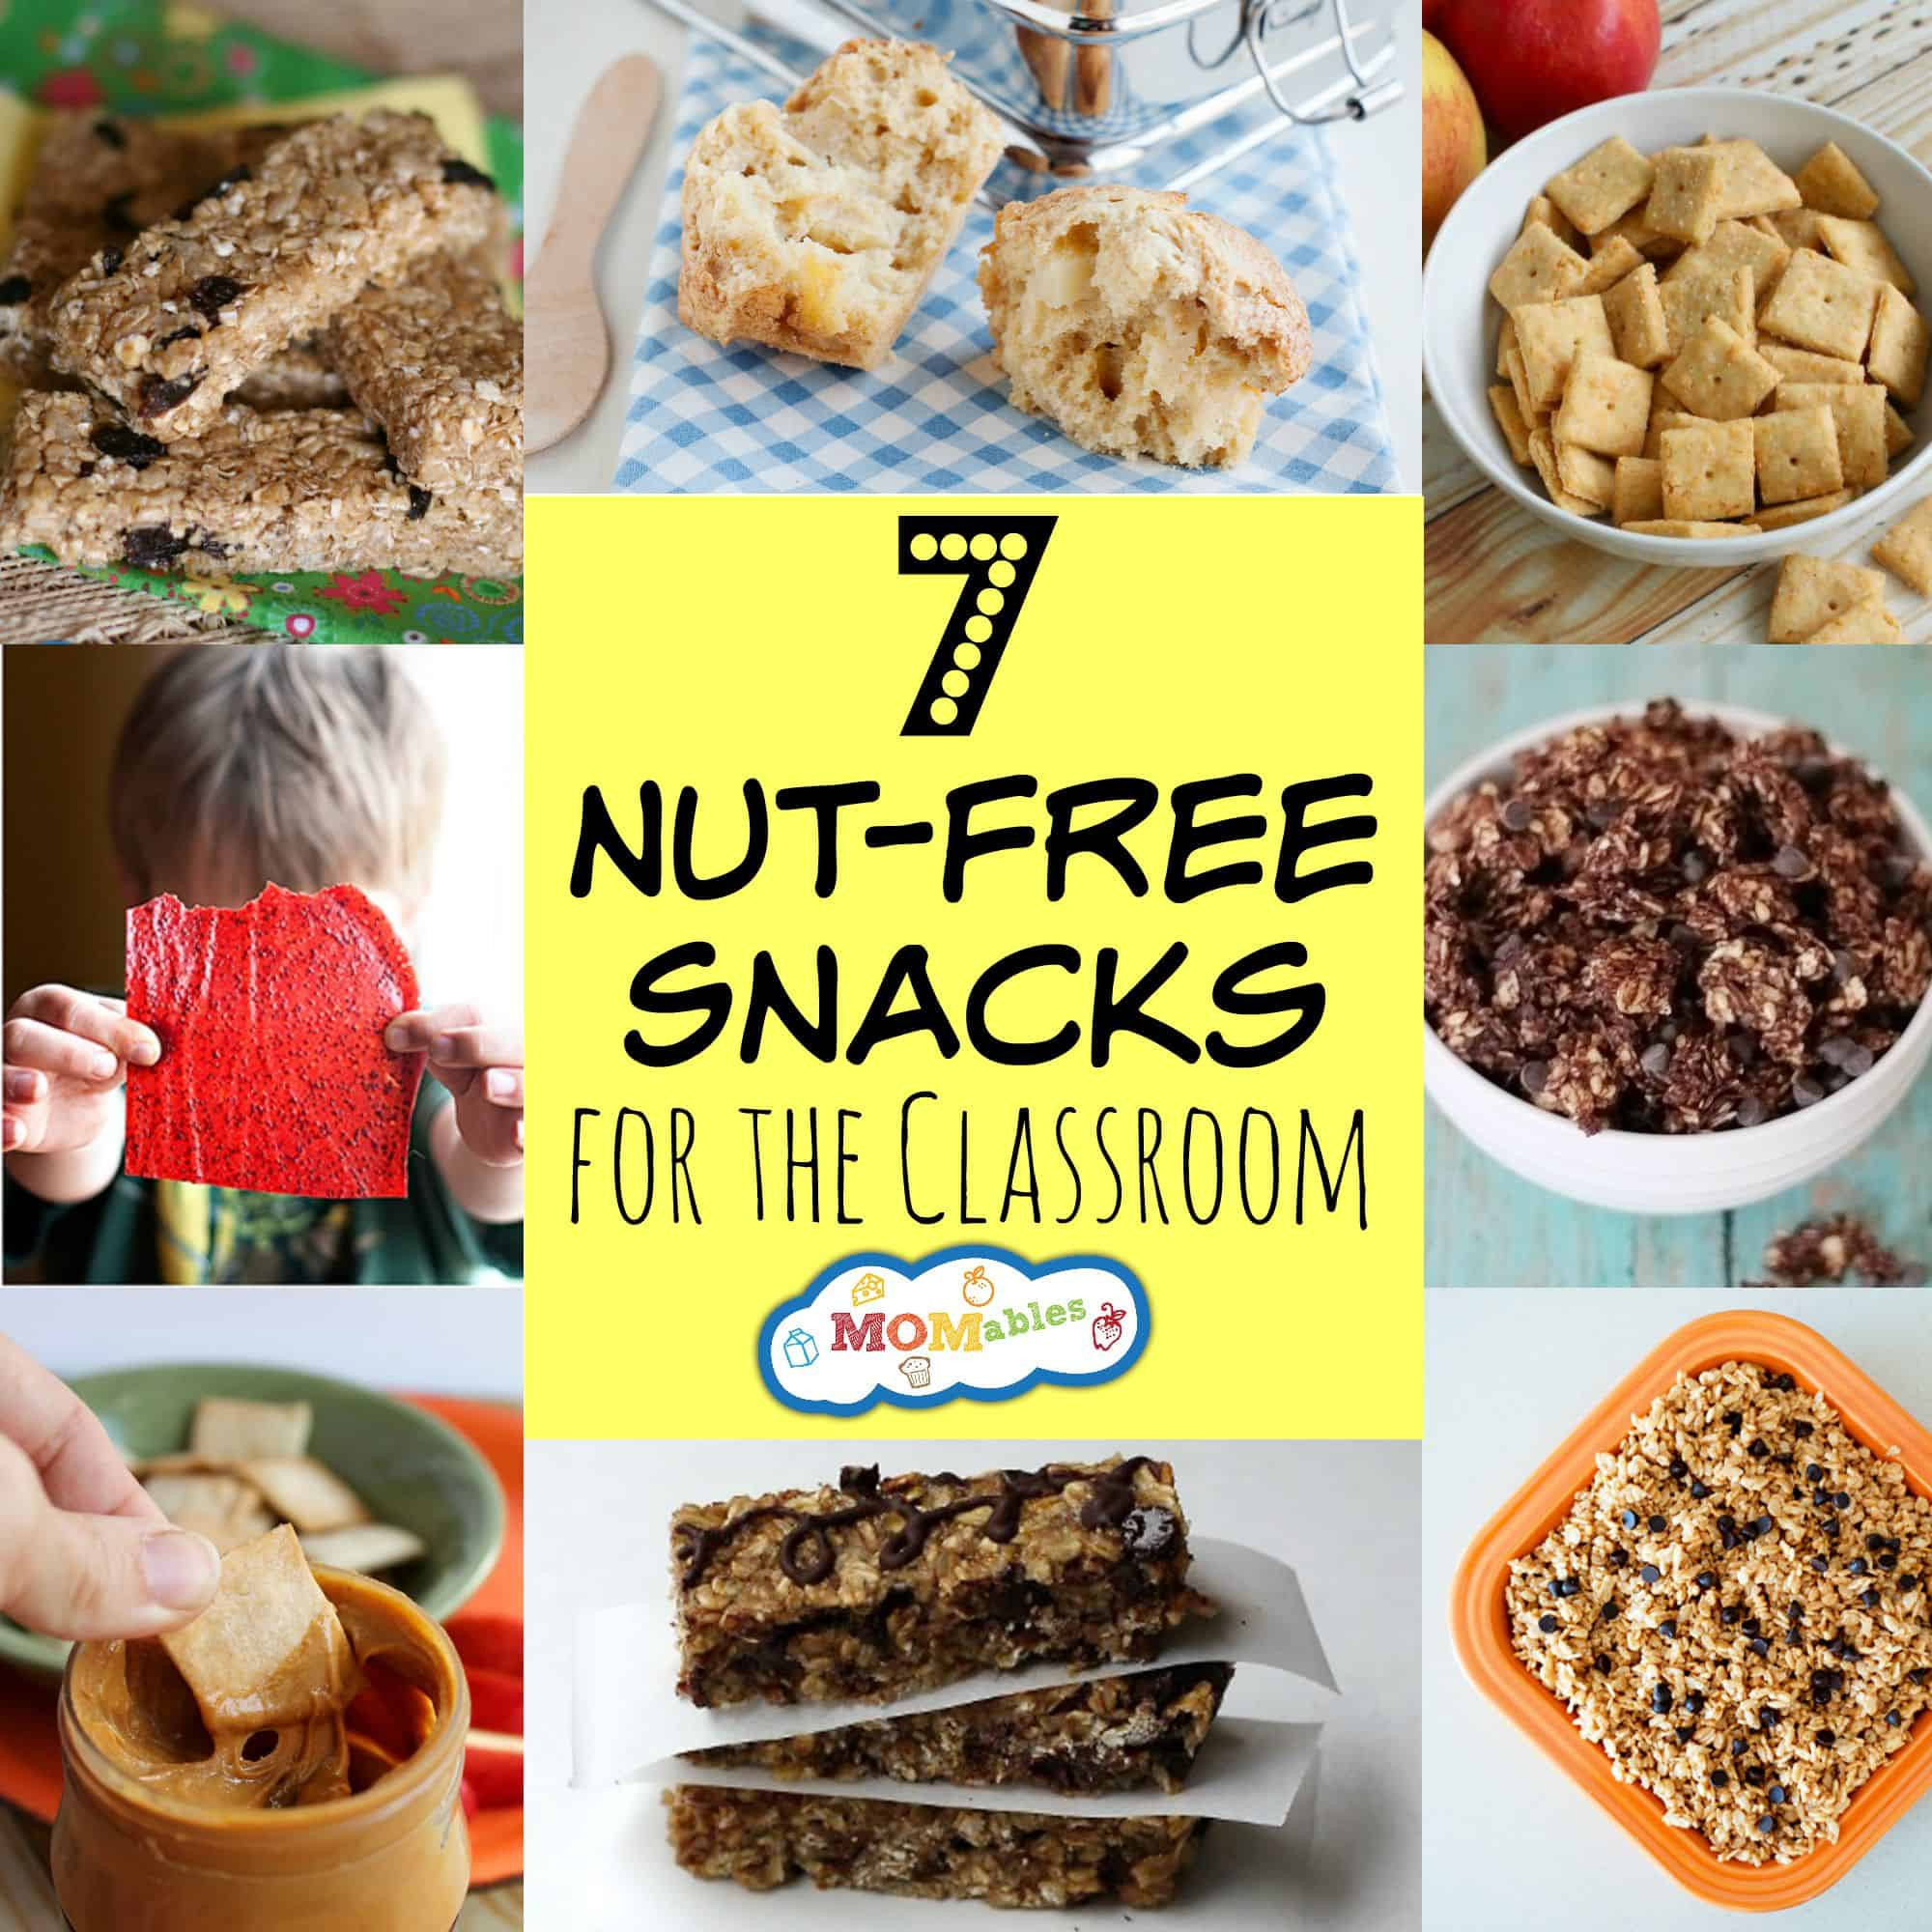 Allergy Free Recipes For Kids
 7 Nut Free Snacks for the Classroom & Lunchbox MOMables